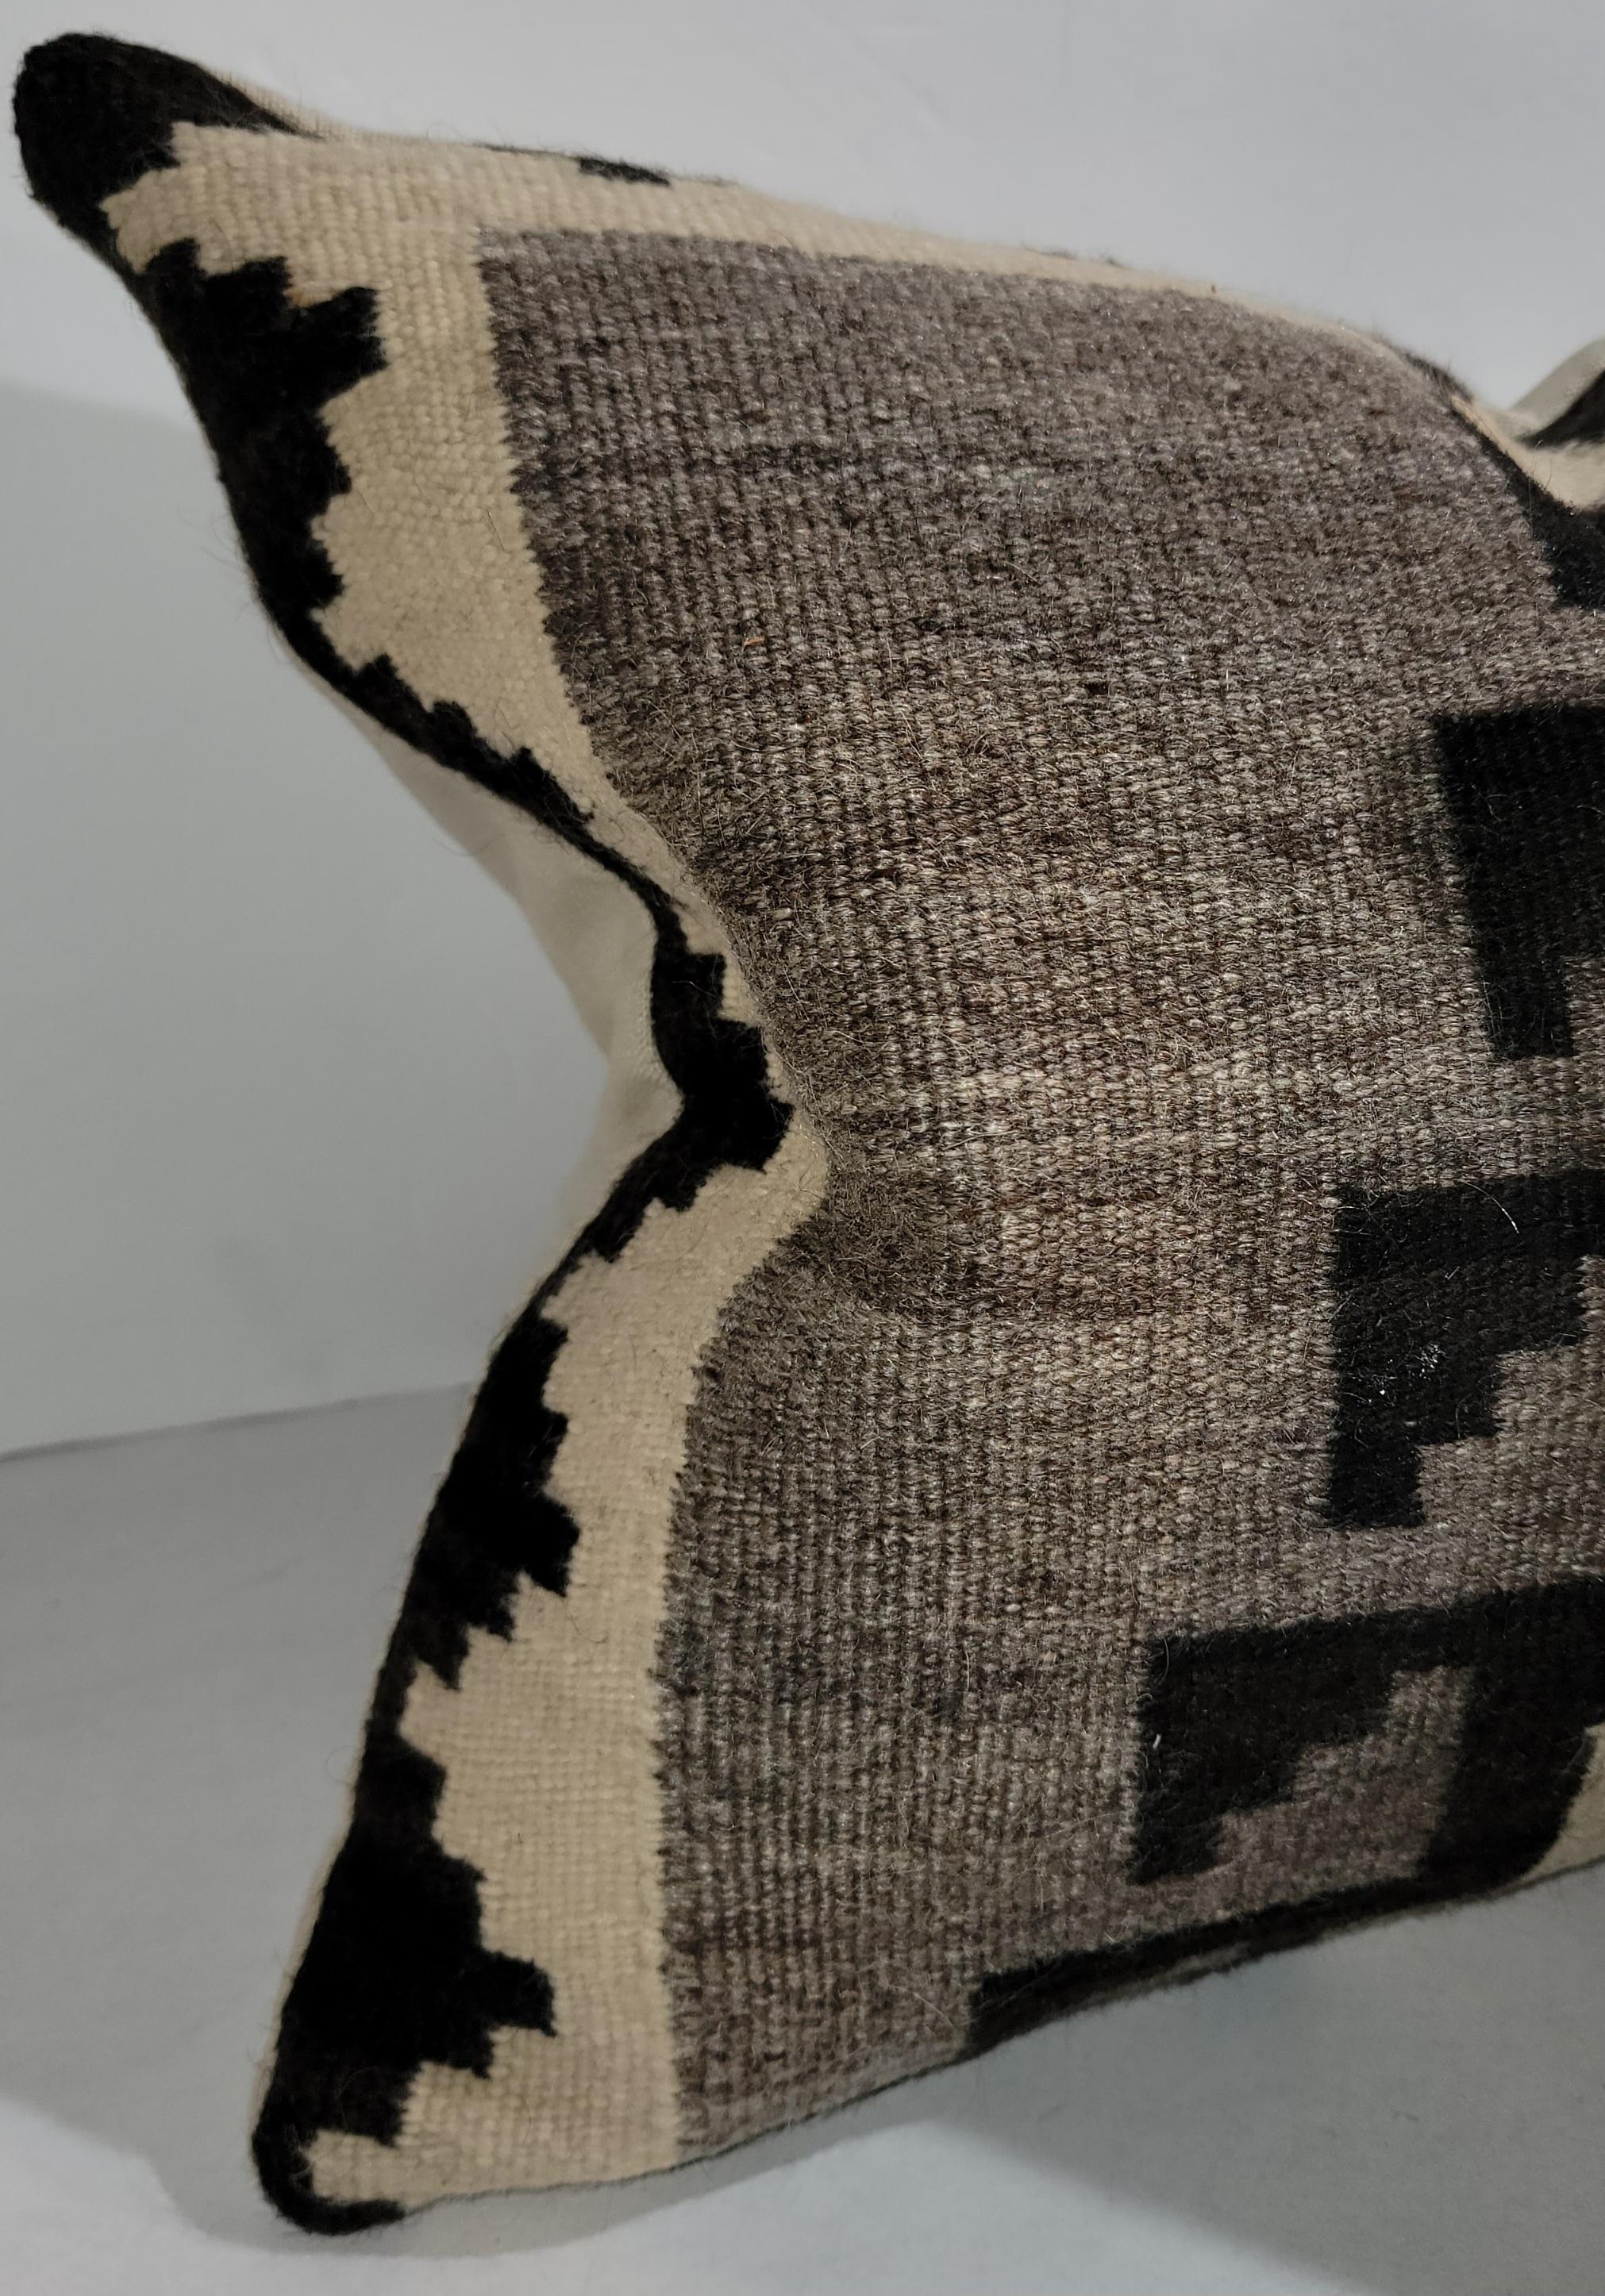 Early 20thc Navajo Indian weaving (saddle blanket )pillows in fantastic condition.The backings are done in a cotton linen.